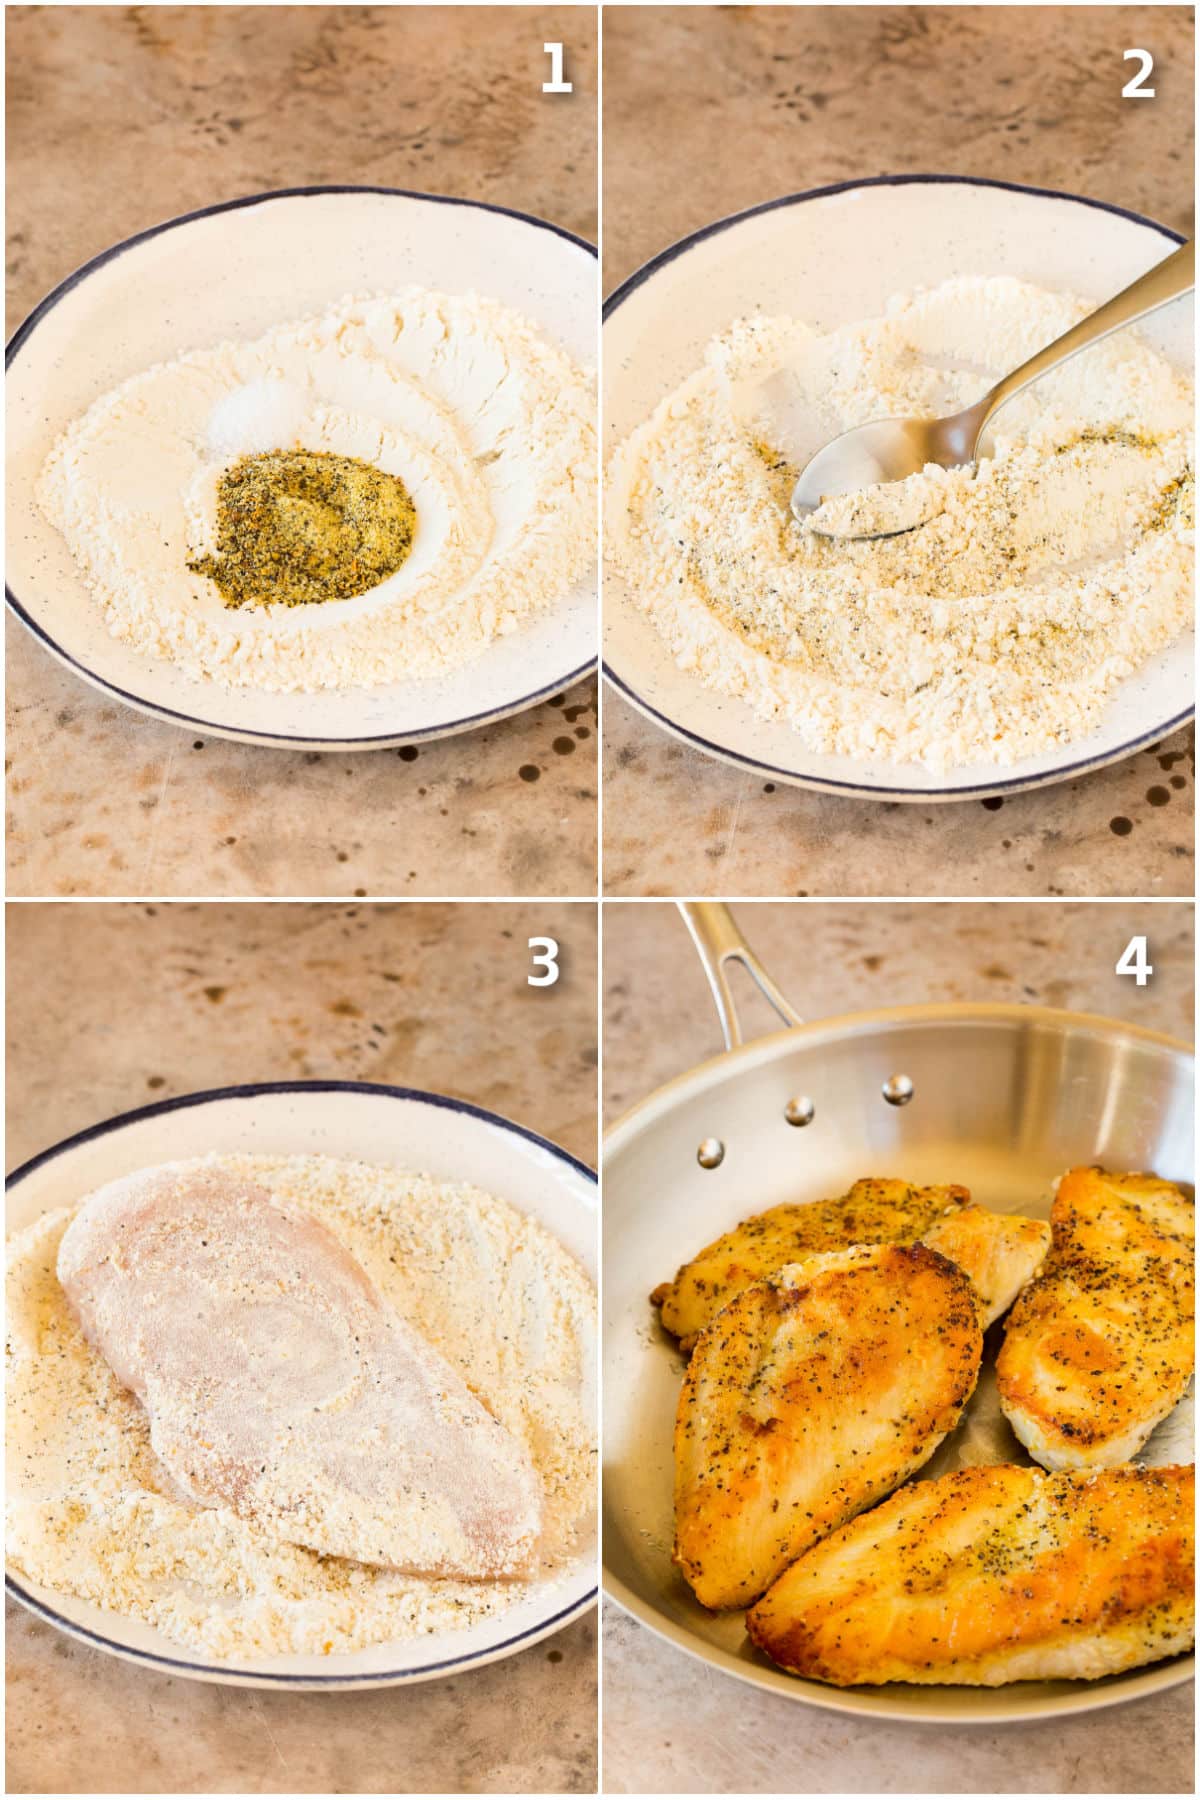 Step by step process shots showing how to make lemon pepper chicken.